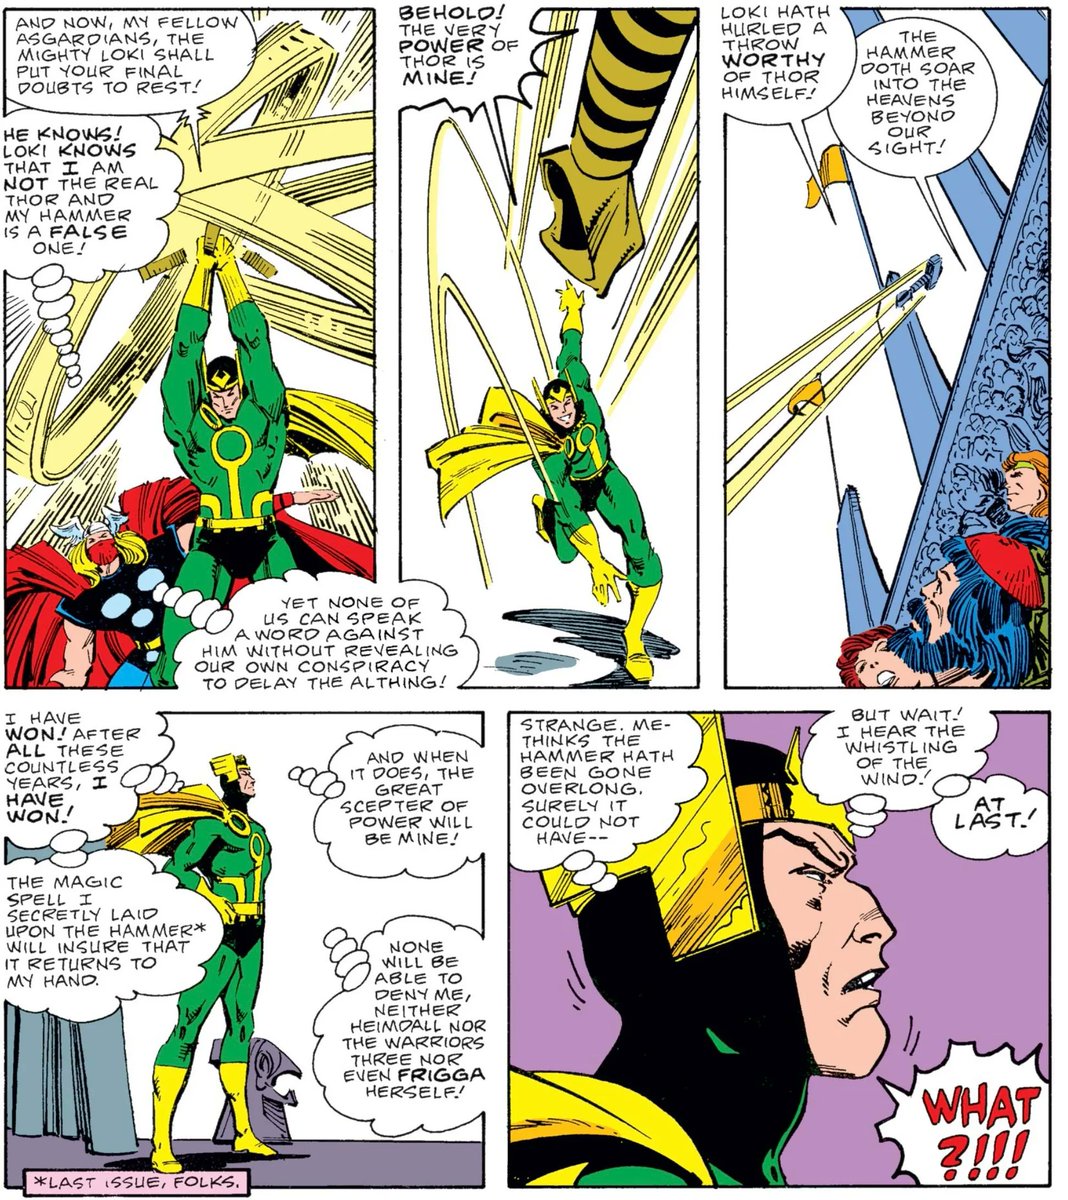 Loki knows that the fake Thor is just Harokin in disguise, so he wields the false Mjolnir to prove his worth to the gathered crowds. Harokin can’t reveal that the hammer is fake without revealing his own deception, so he has to stand by and watch quietly! #marvel #thor https://t.co/w0d0tAij2Q